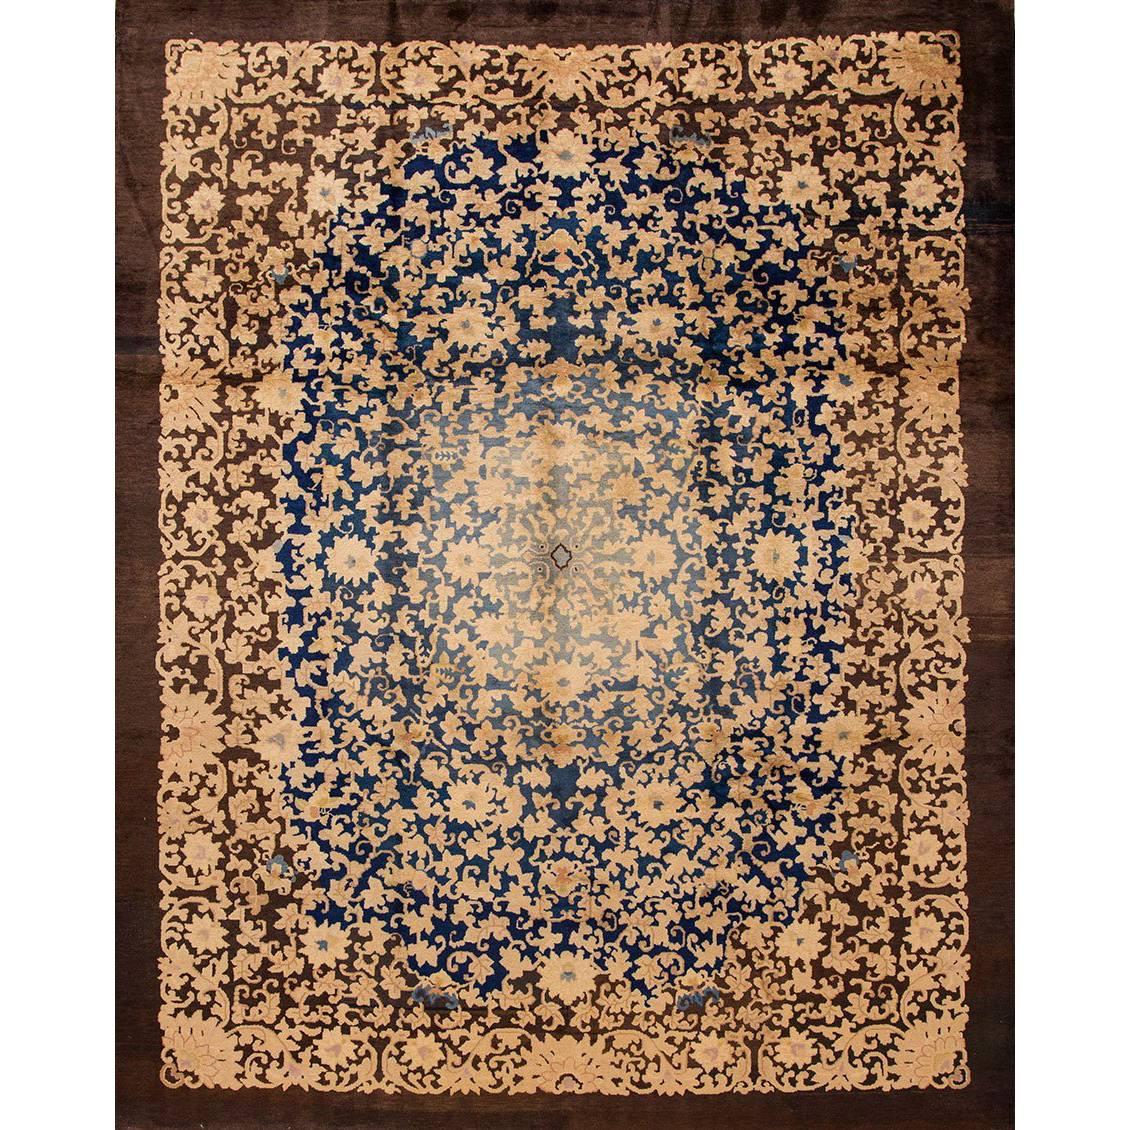 Vintage 1920s Brown and Blue Chinese Art Deco Fette Rug